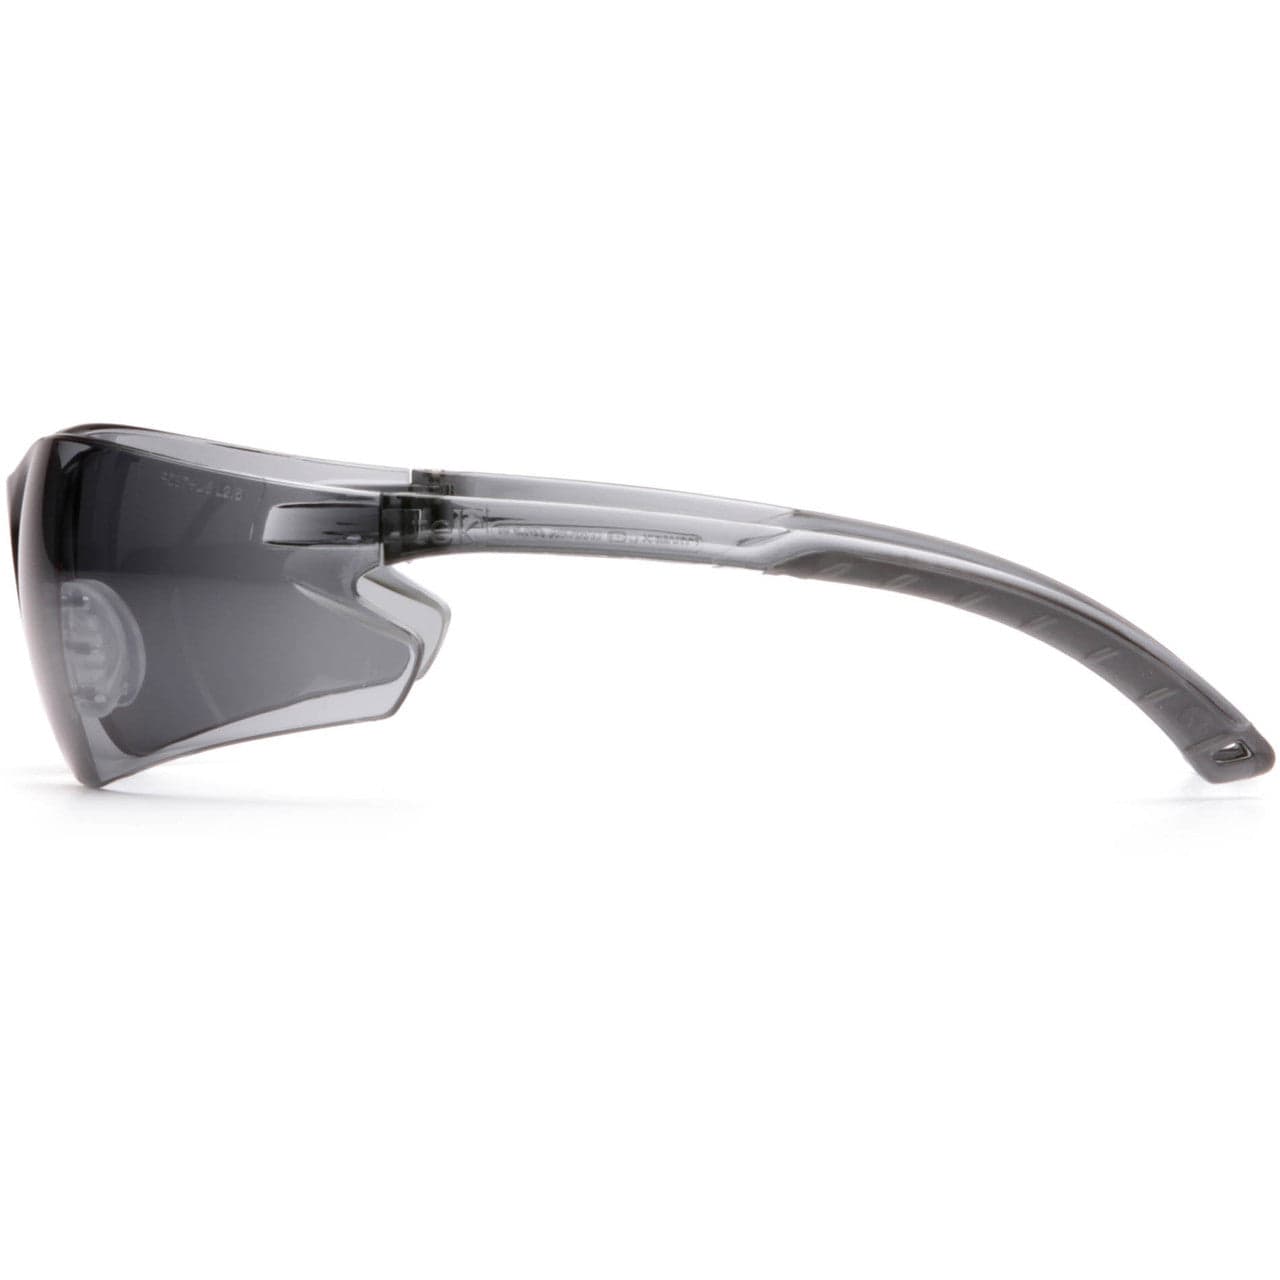 Pyramex Itek Safety Glasses with Gray Anti-Fog Lens S5820ST Side View